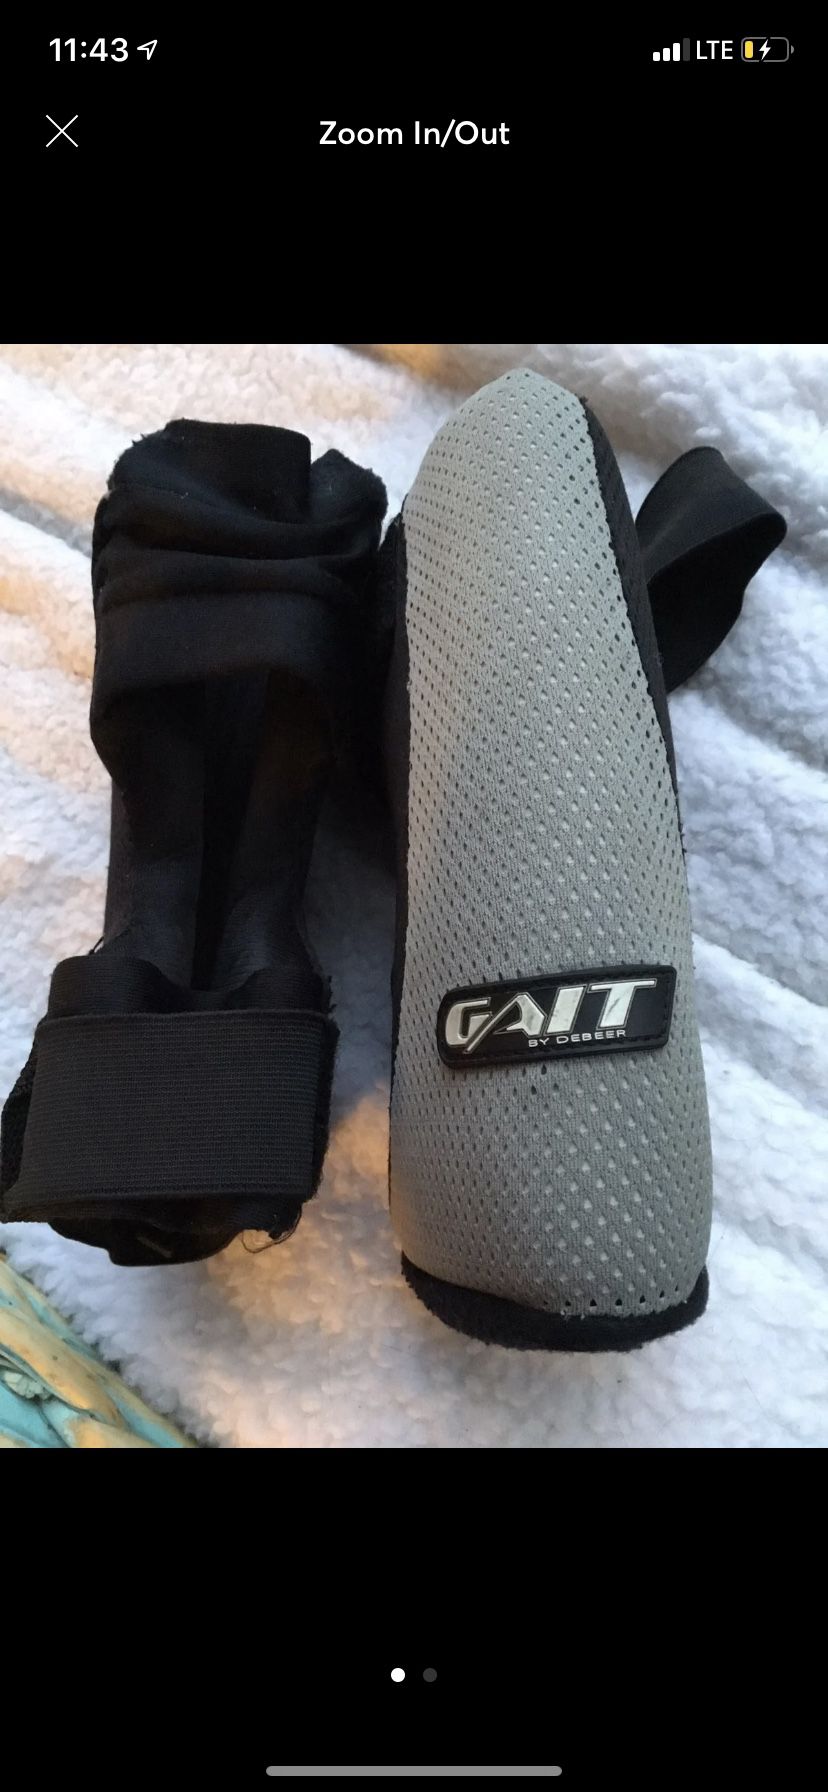 M/l lacrosse elbow pads. SHIPPING ONLY